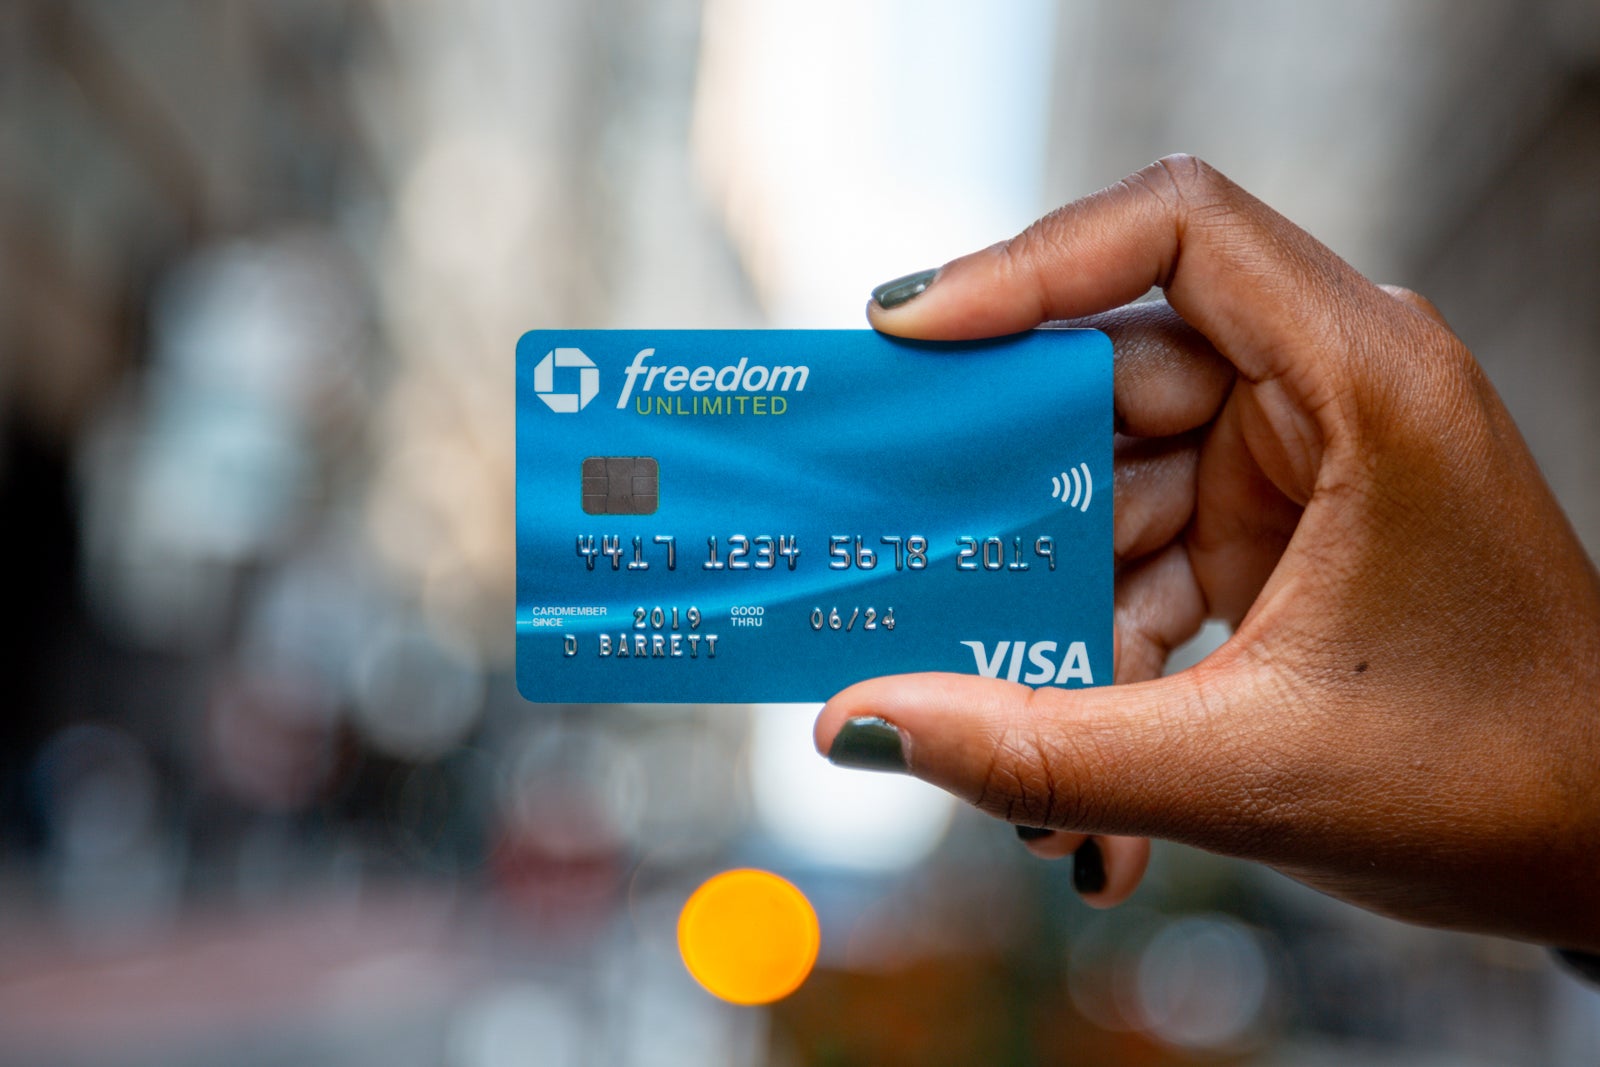 chase freedom unlimited foreign fee